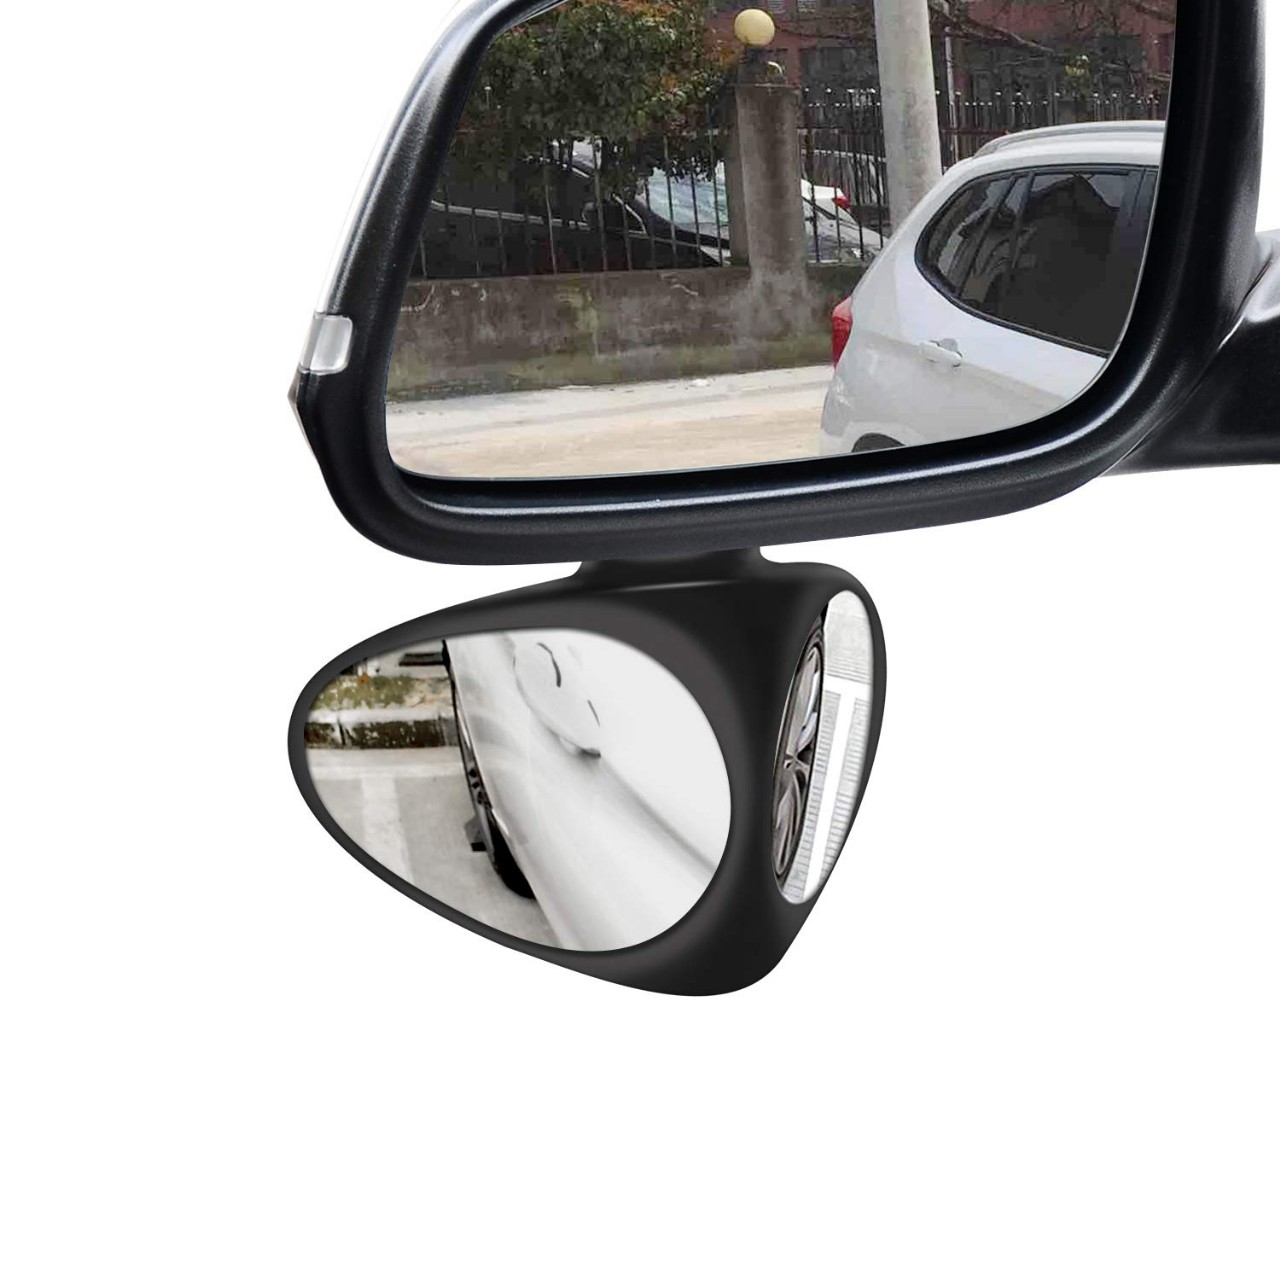 Car Blind Spot Mirror, Automotive 360 Rotate Adjustable Stick-on Front/Rear View Mirrors for Traffic